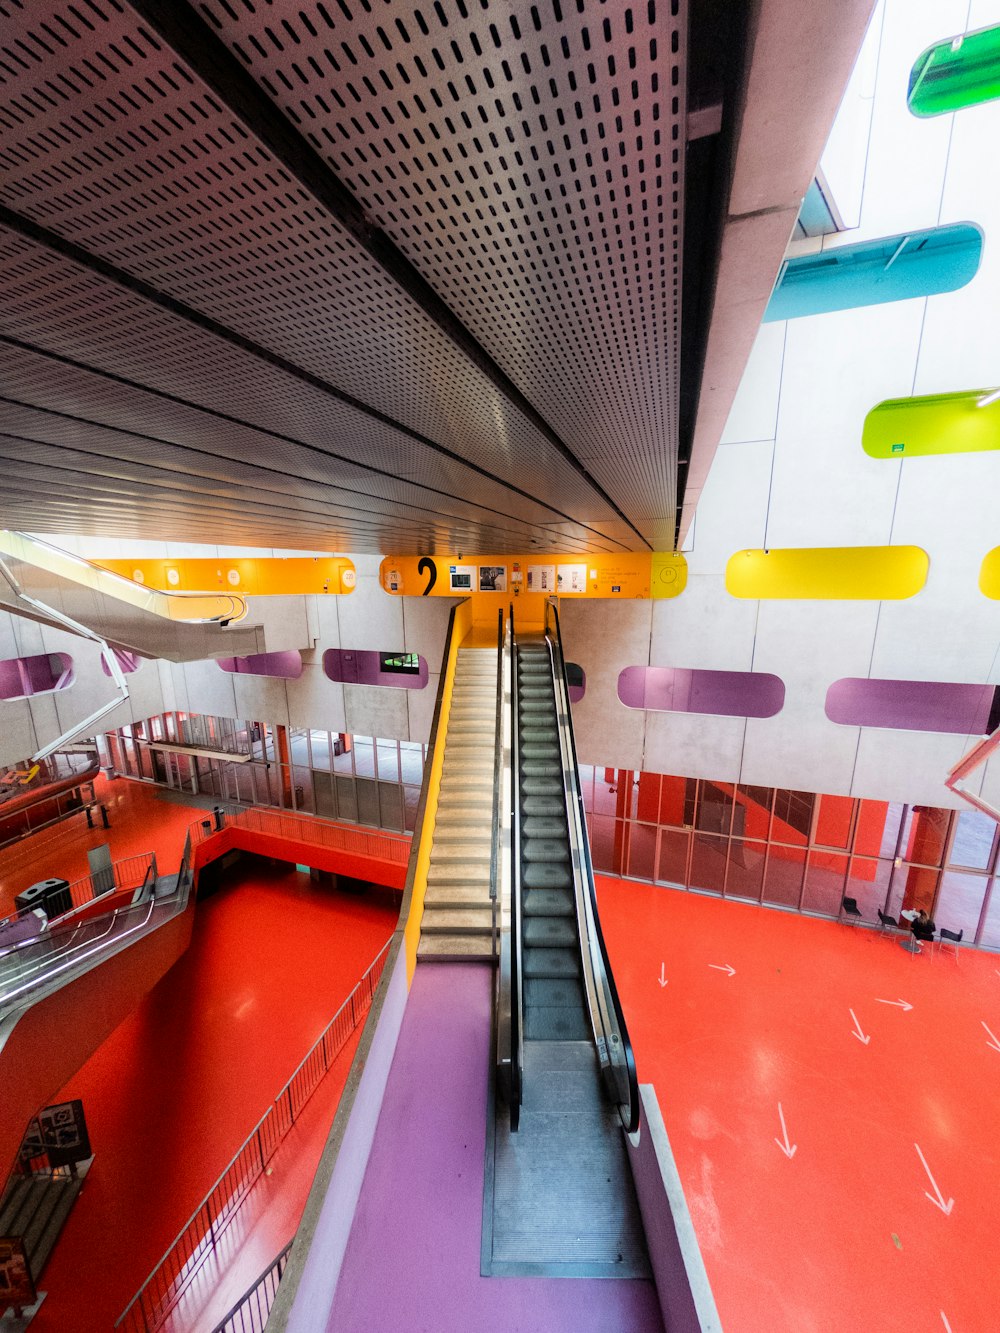 an escalator in a building with a colorful floor